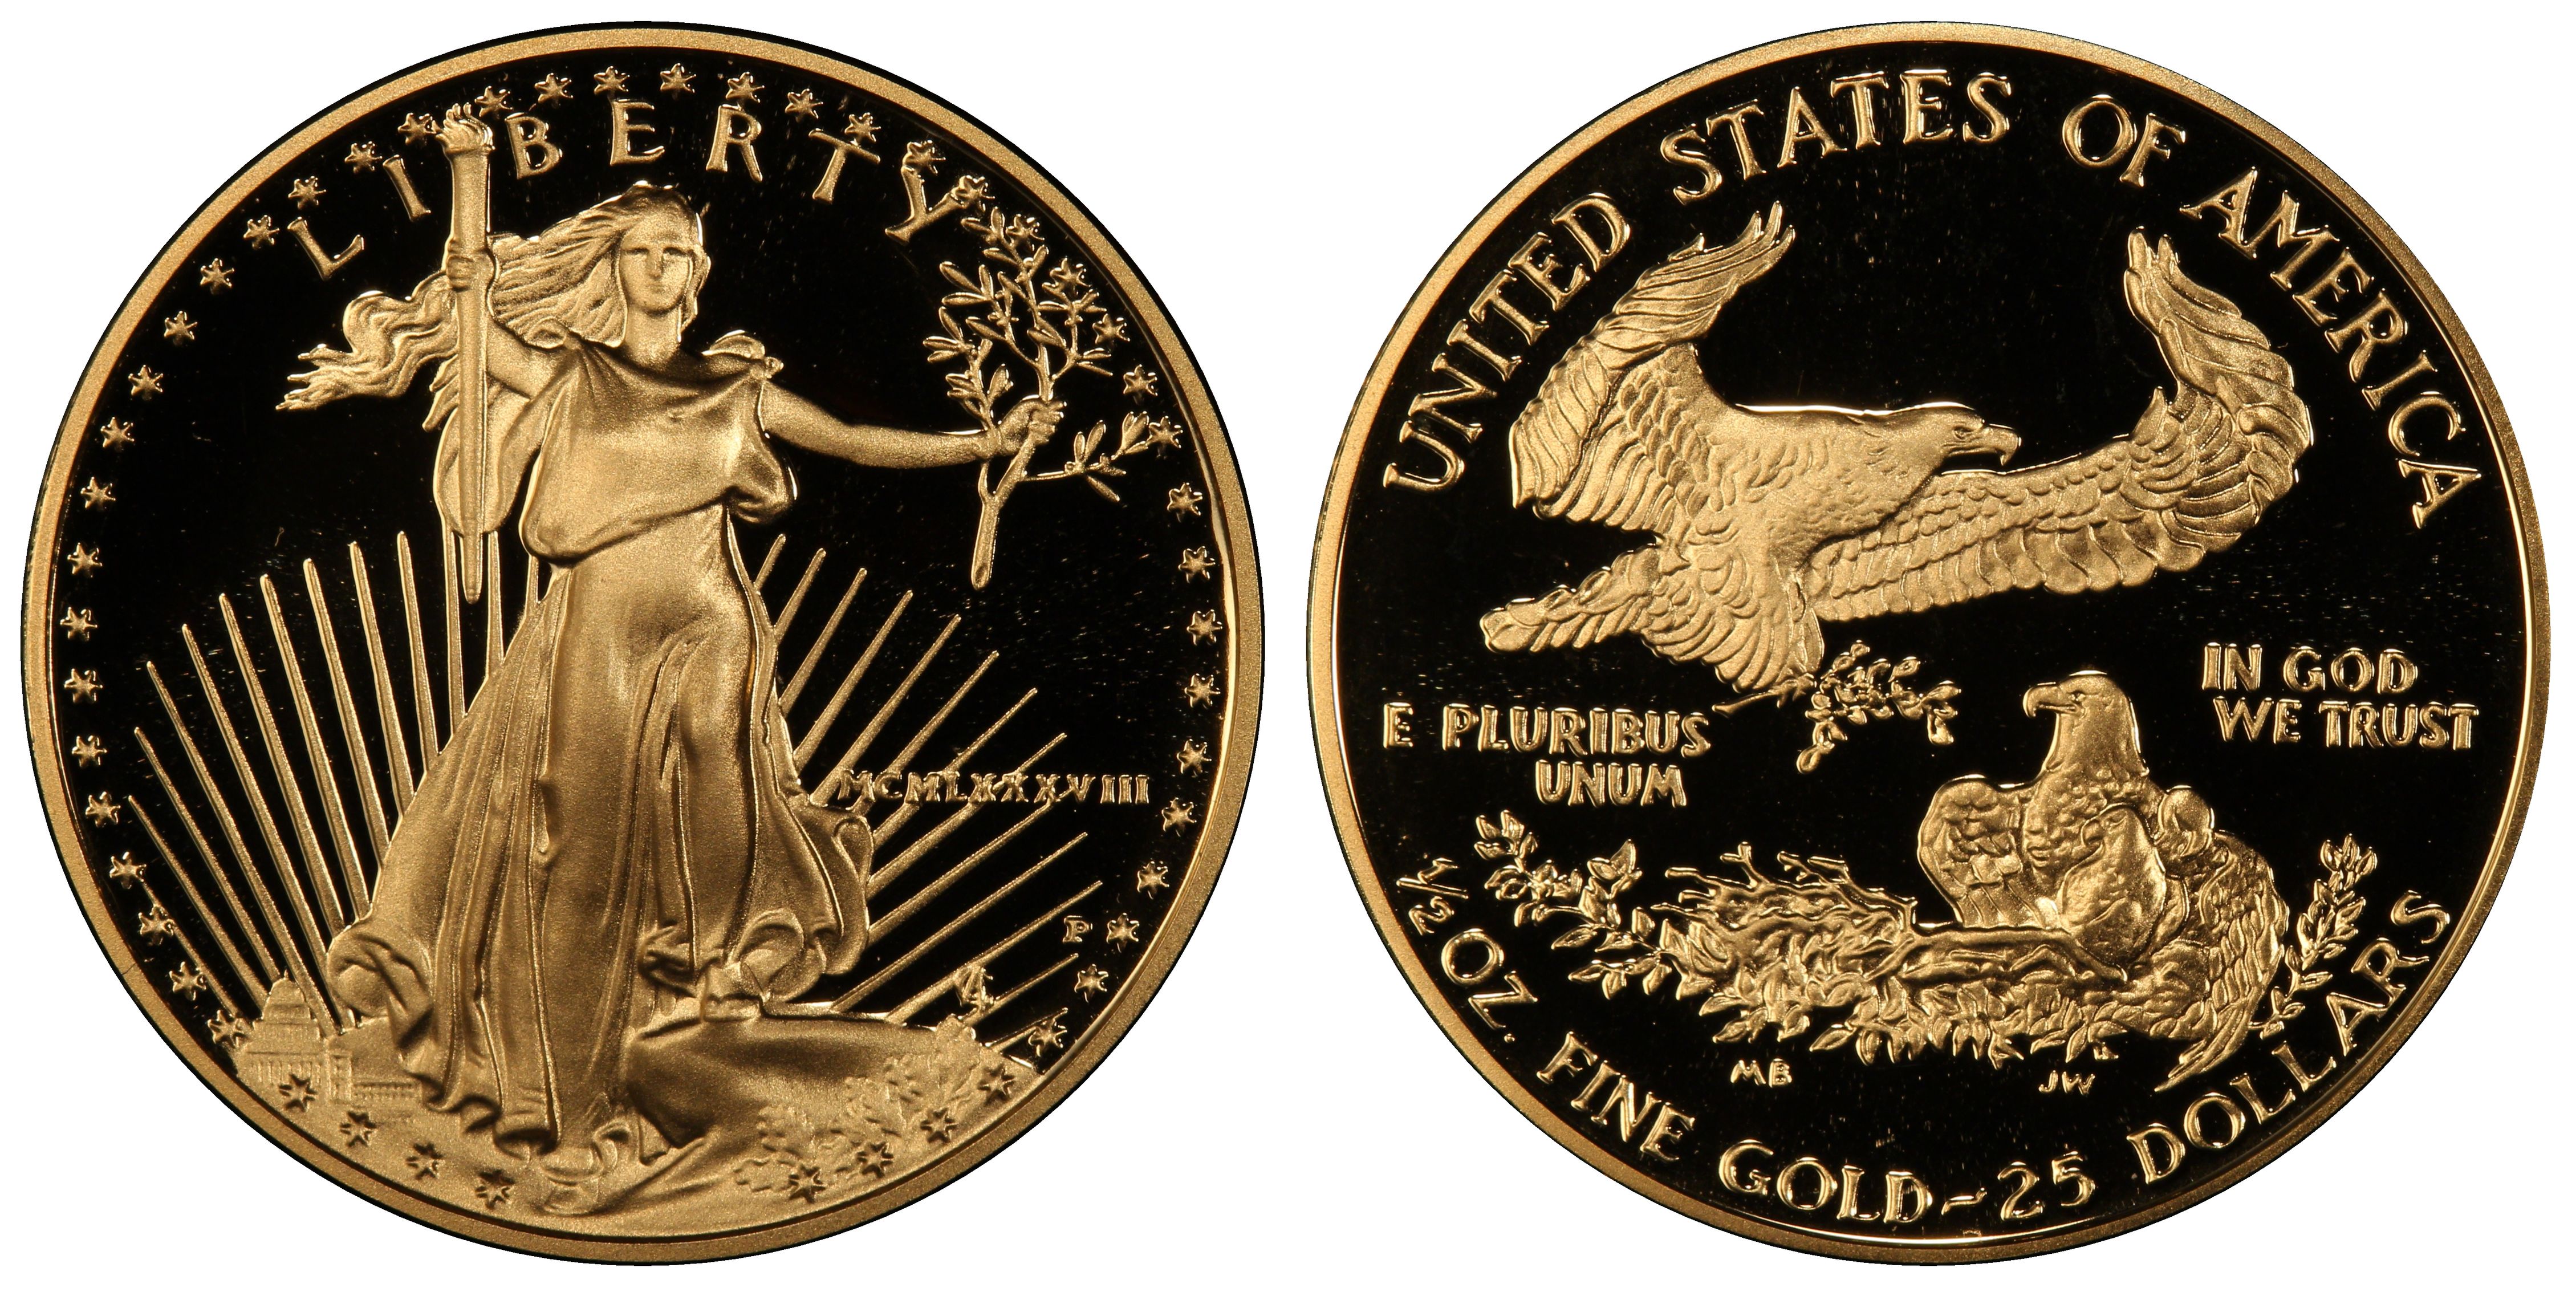 1988-P $25 Gold Eagle, DCAM (Proof) Gold Eagles - PCGS CoinFacts